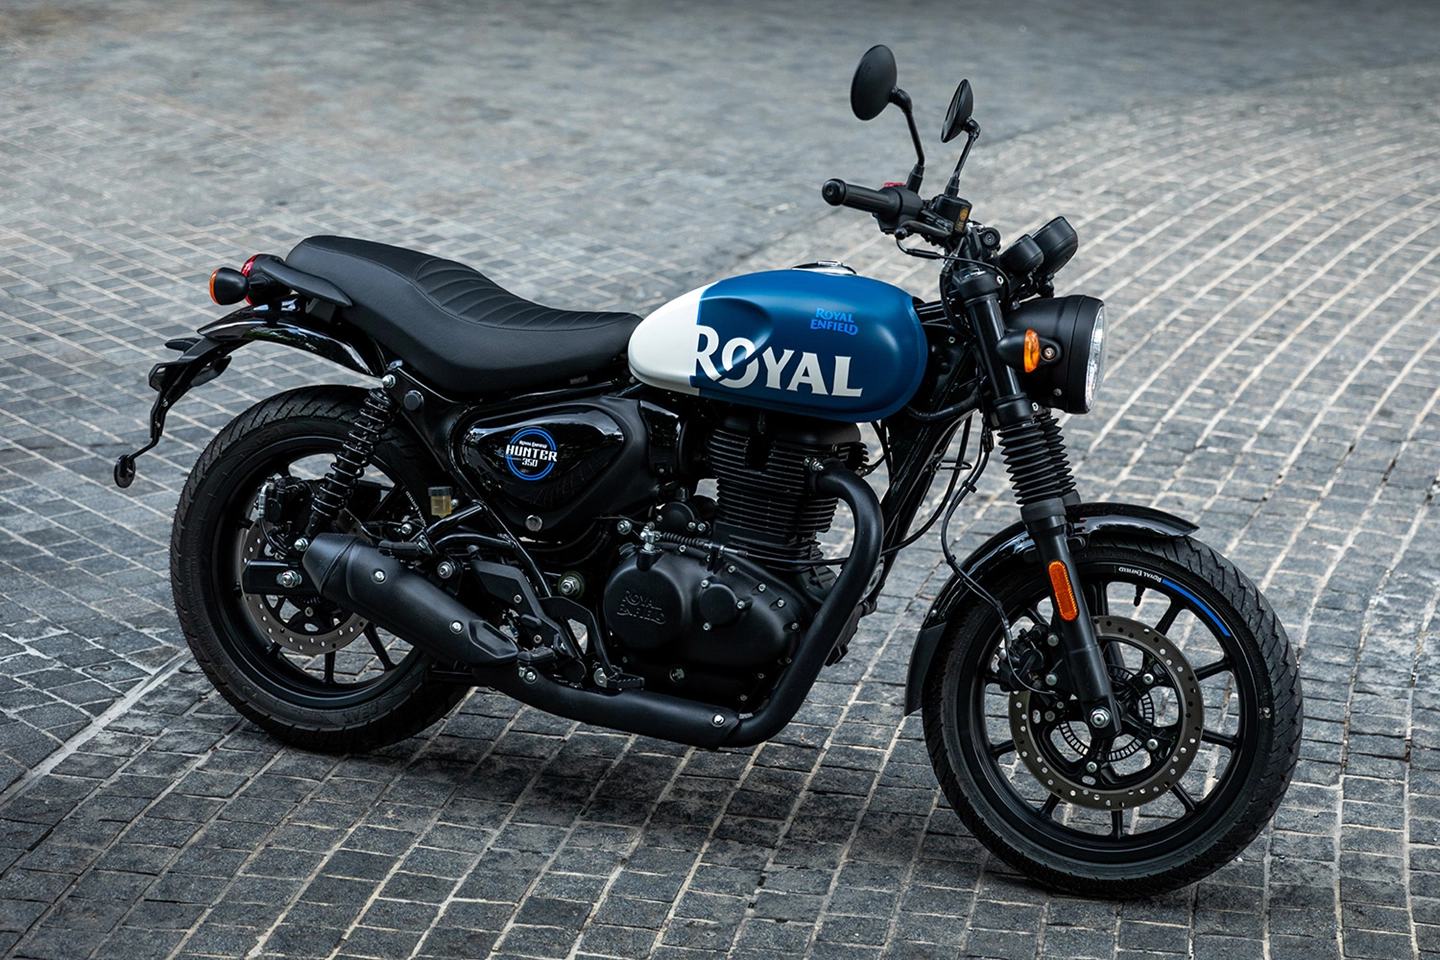 Discover the cost of the Royal Enfield Bullet 350 in India - everything you need to know about its price!